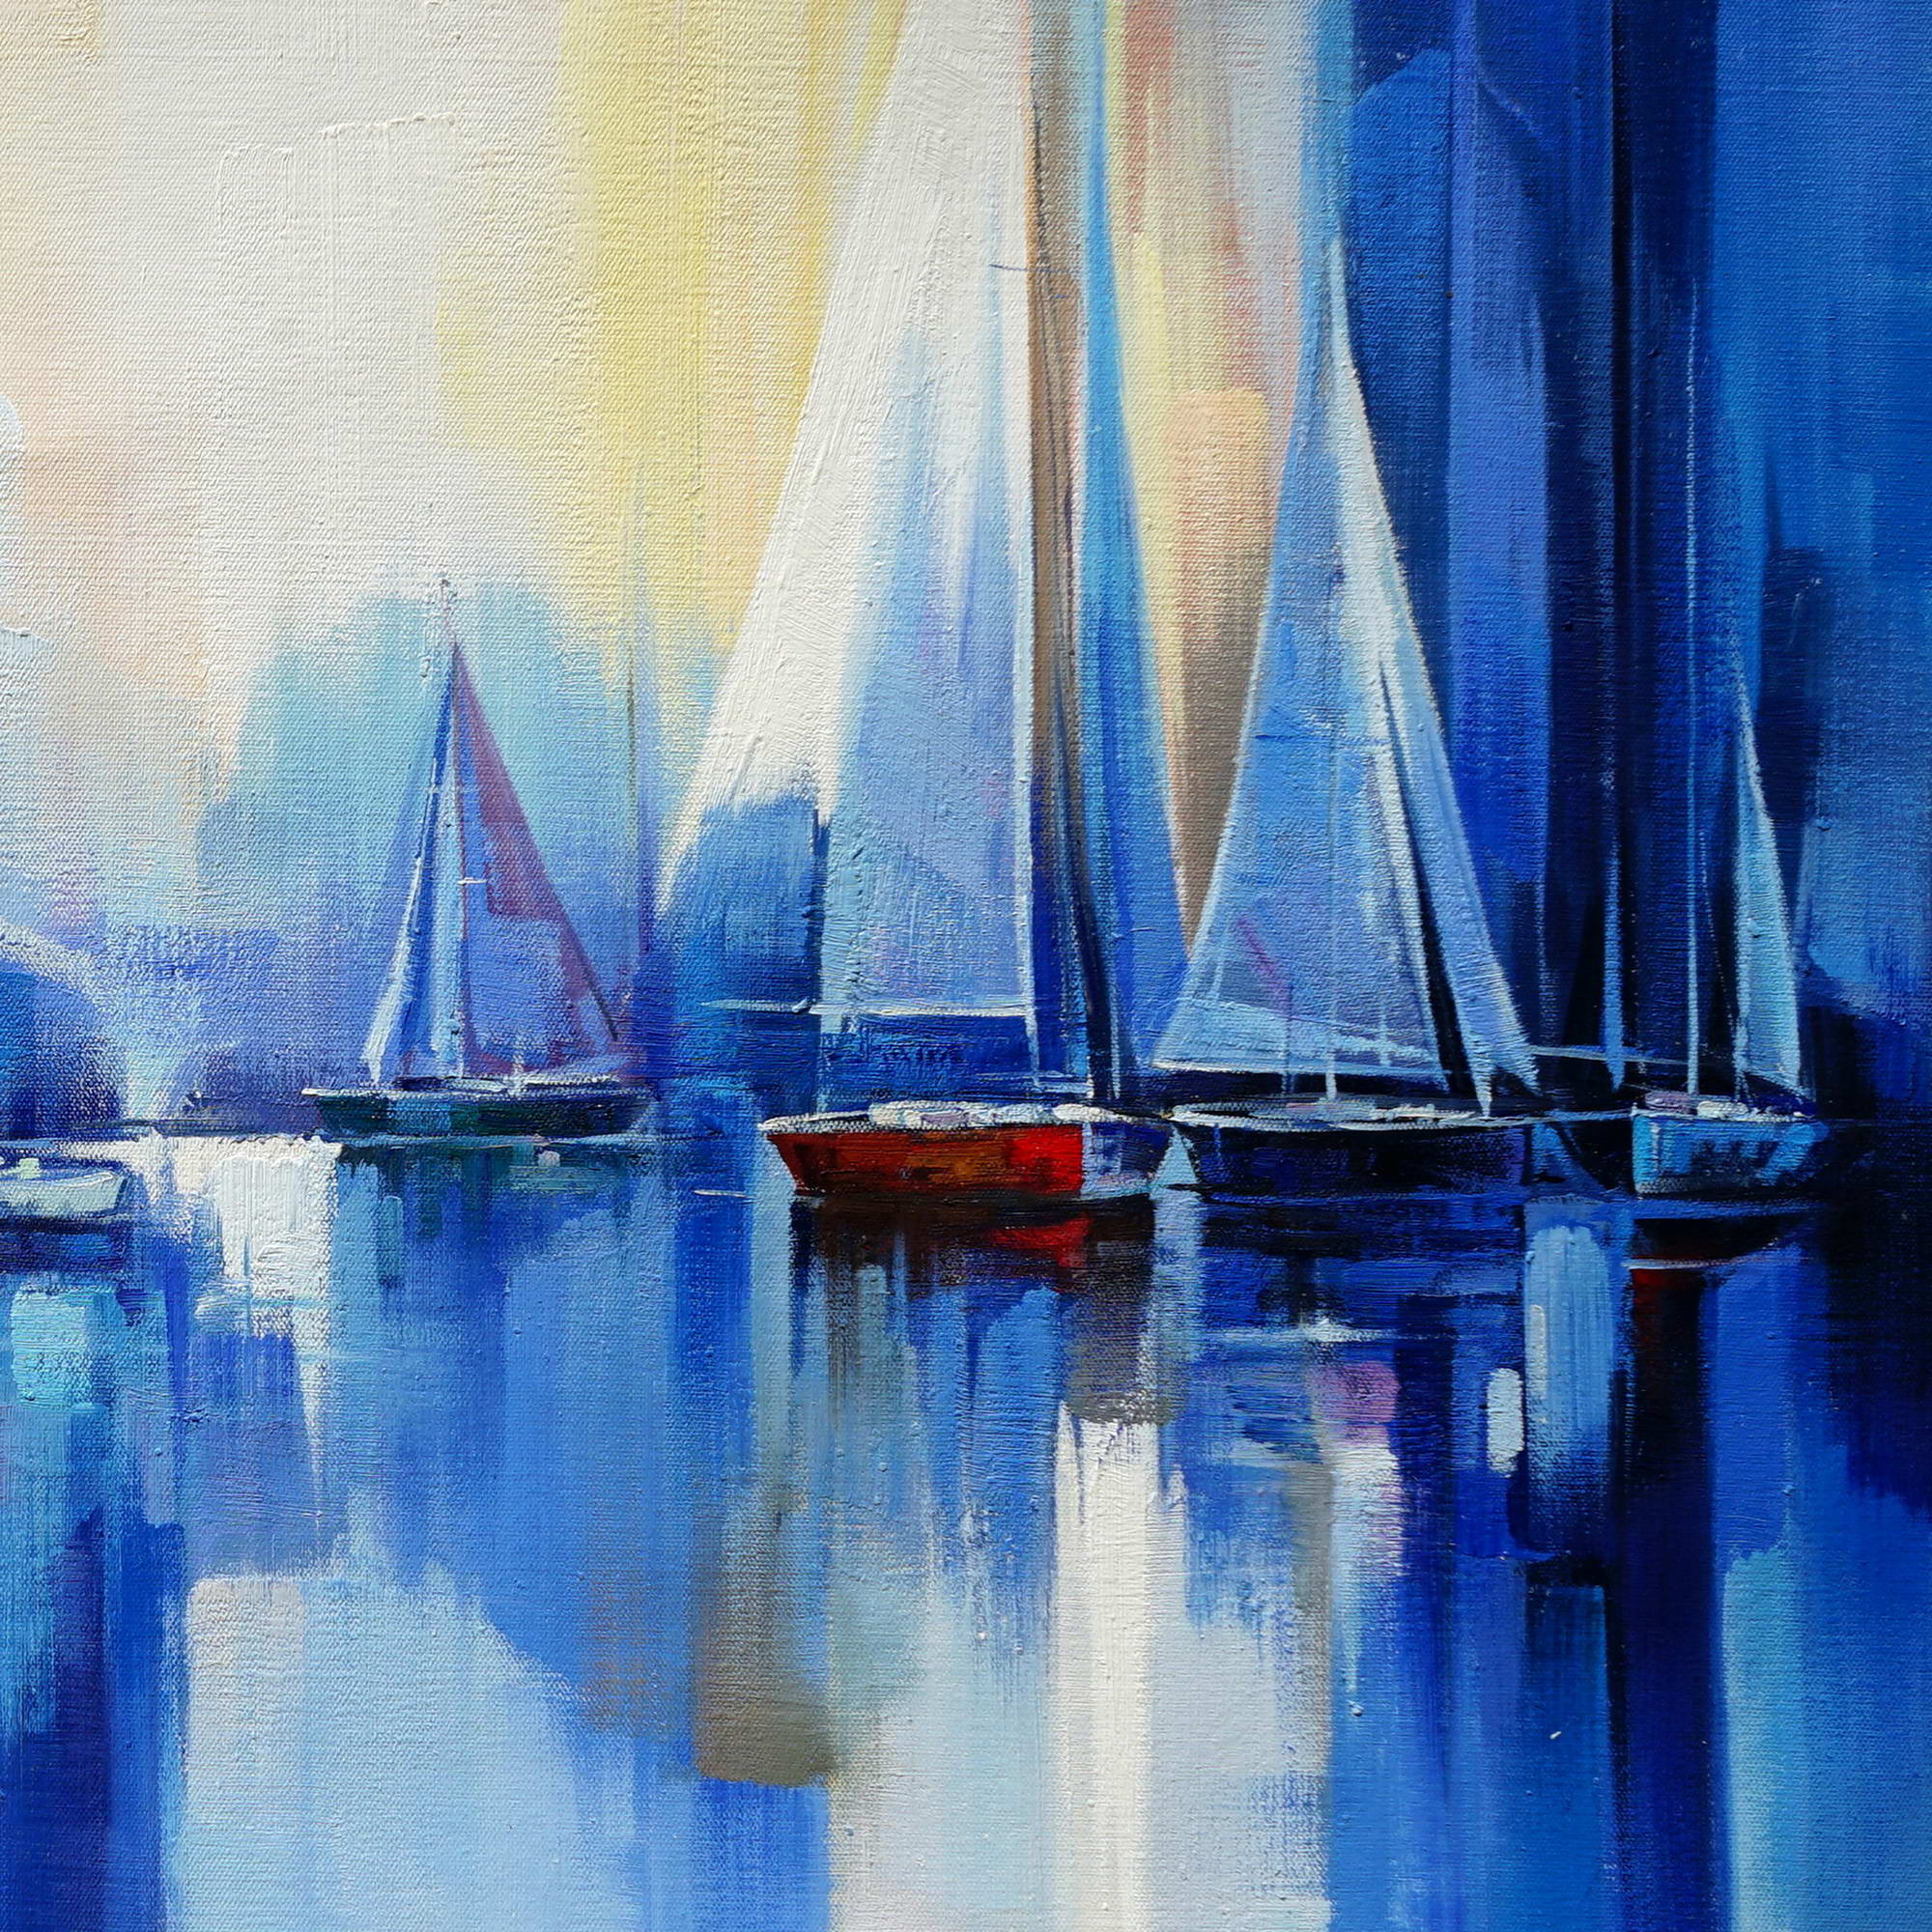 Hand painted Marina at sunset Abstract 75x150cm